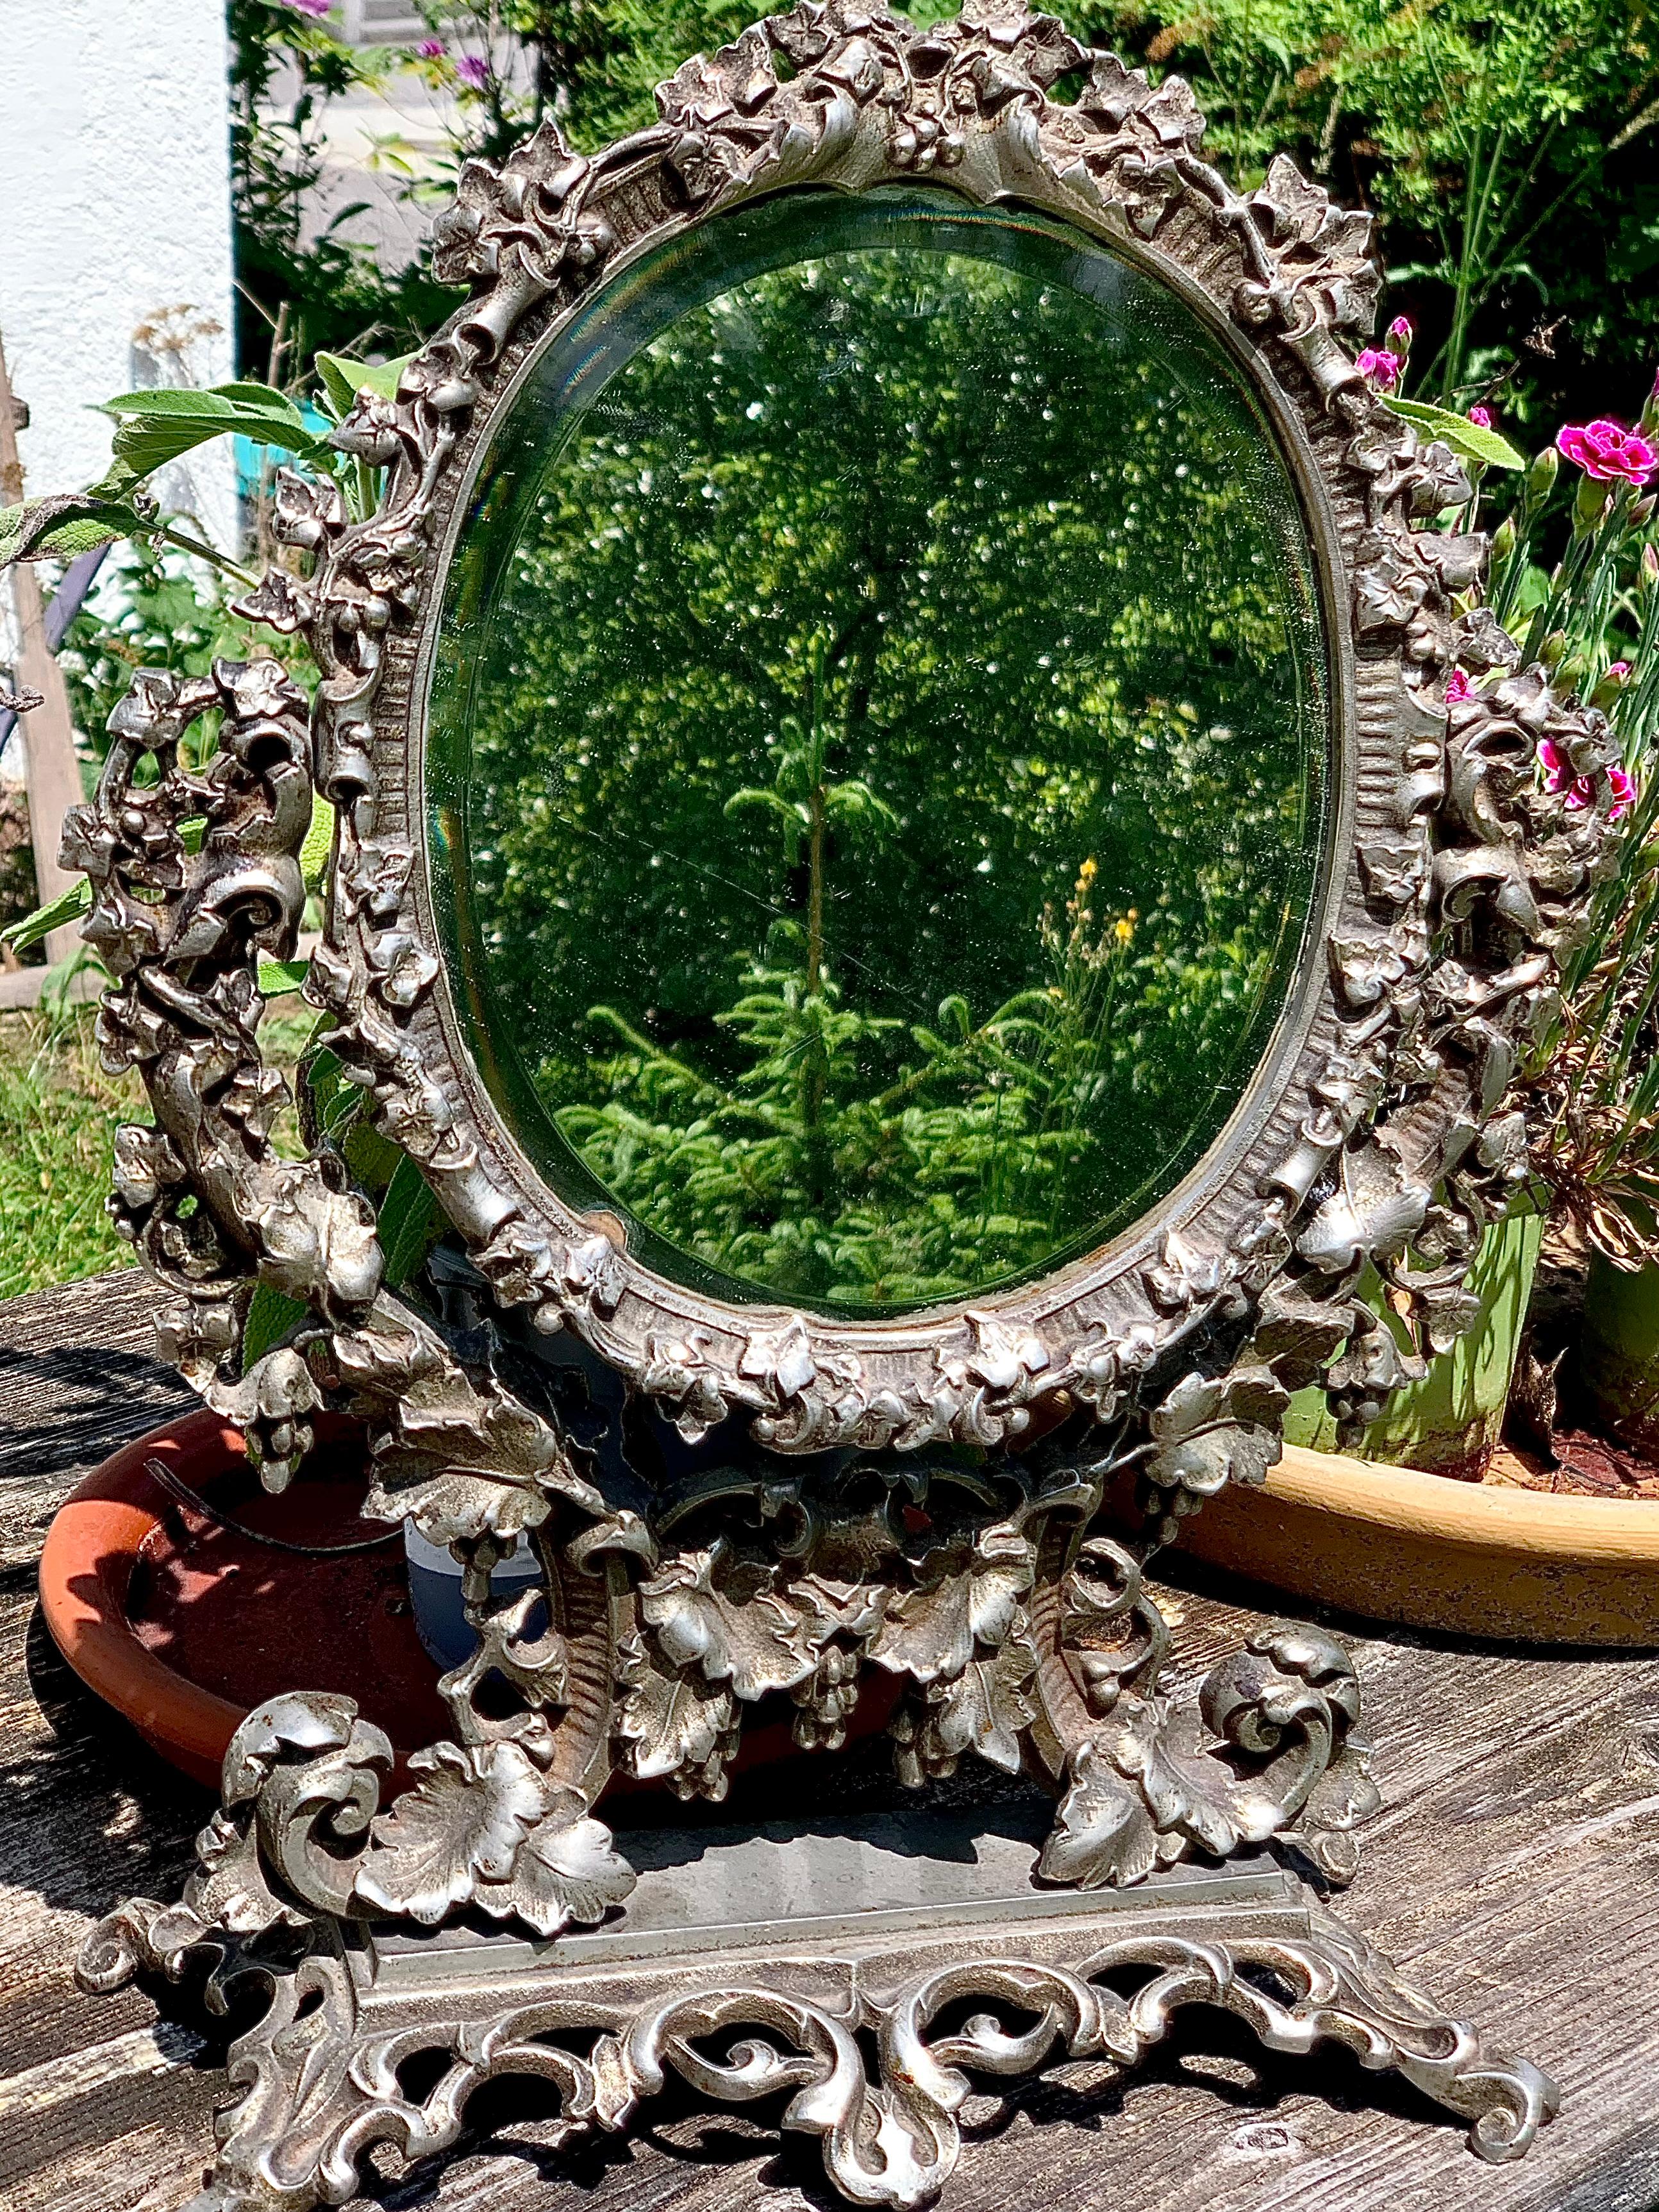 This revolving mirror has been made out of cast iron in the third quarter of the nineteenth century in a German art foundry. It has been cast fom a beautifully molded modell and has a rich and sumptuous feel to it.
It celebrates the autumn, vine